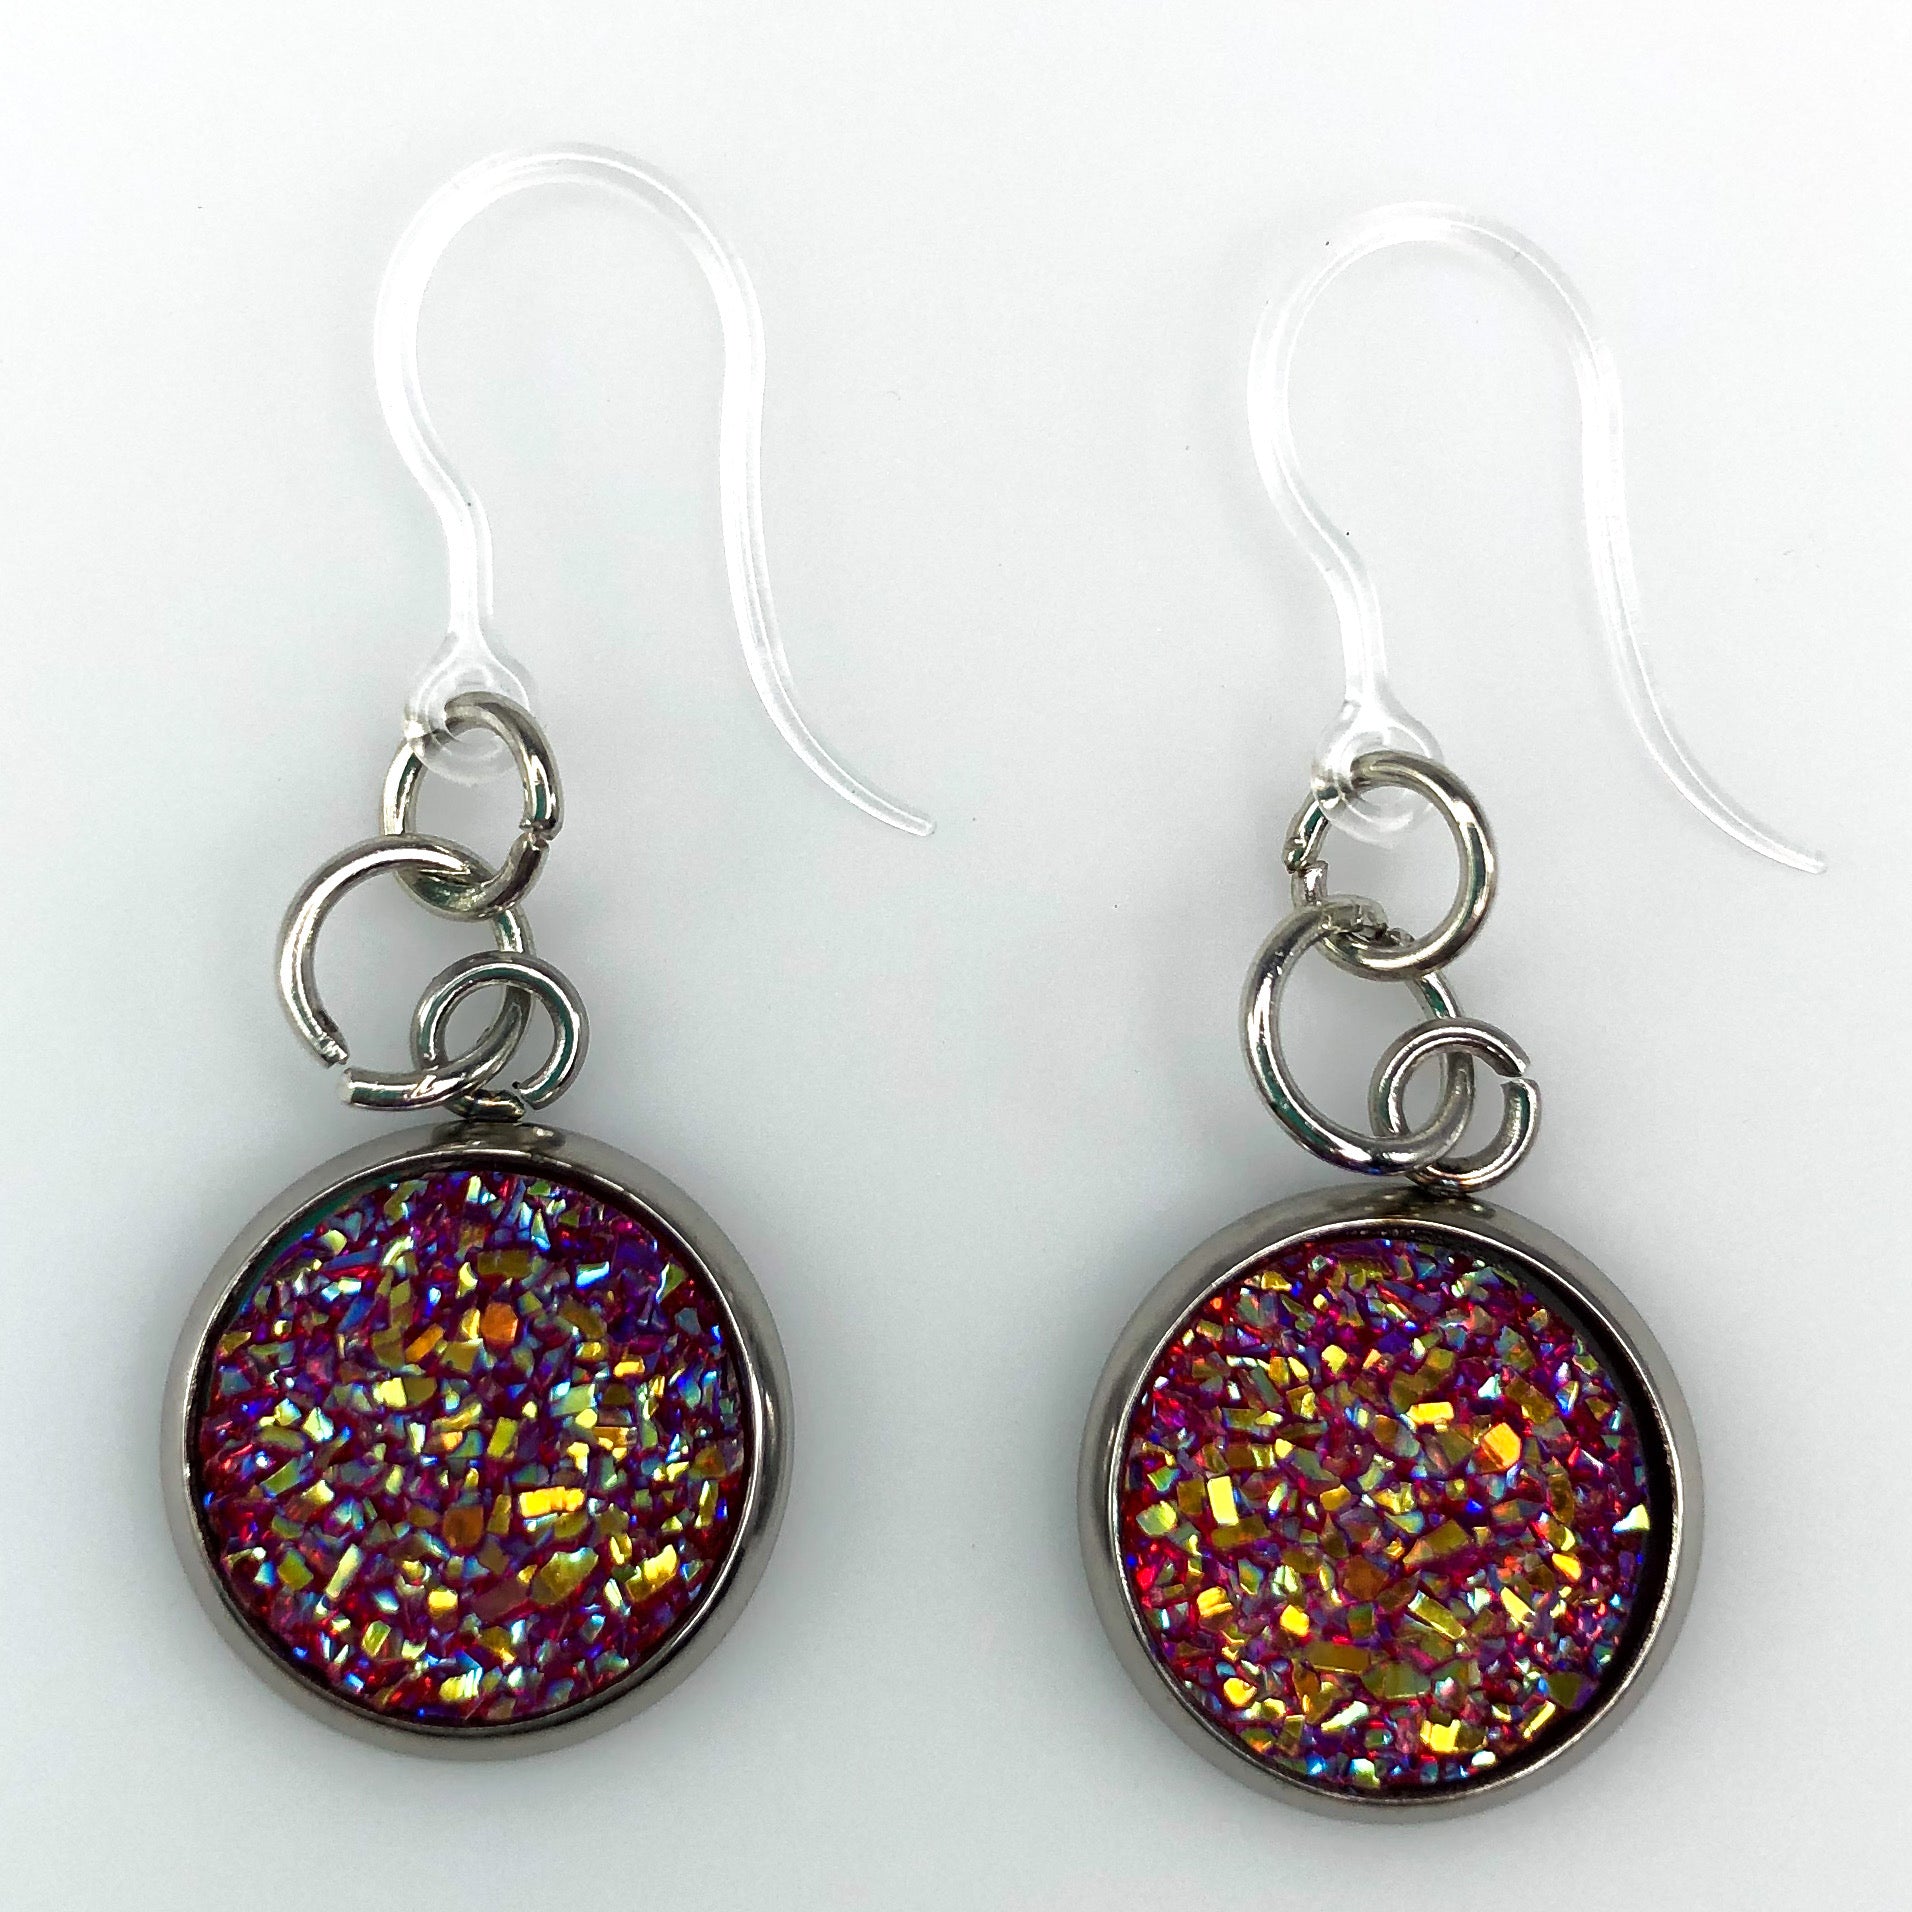 Matching Faux Druzy Earrings & Necklace (Dangles) - magenta